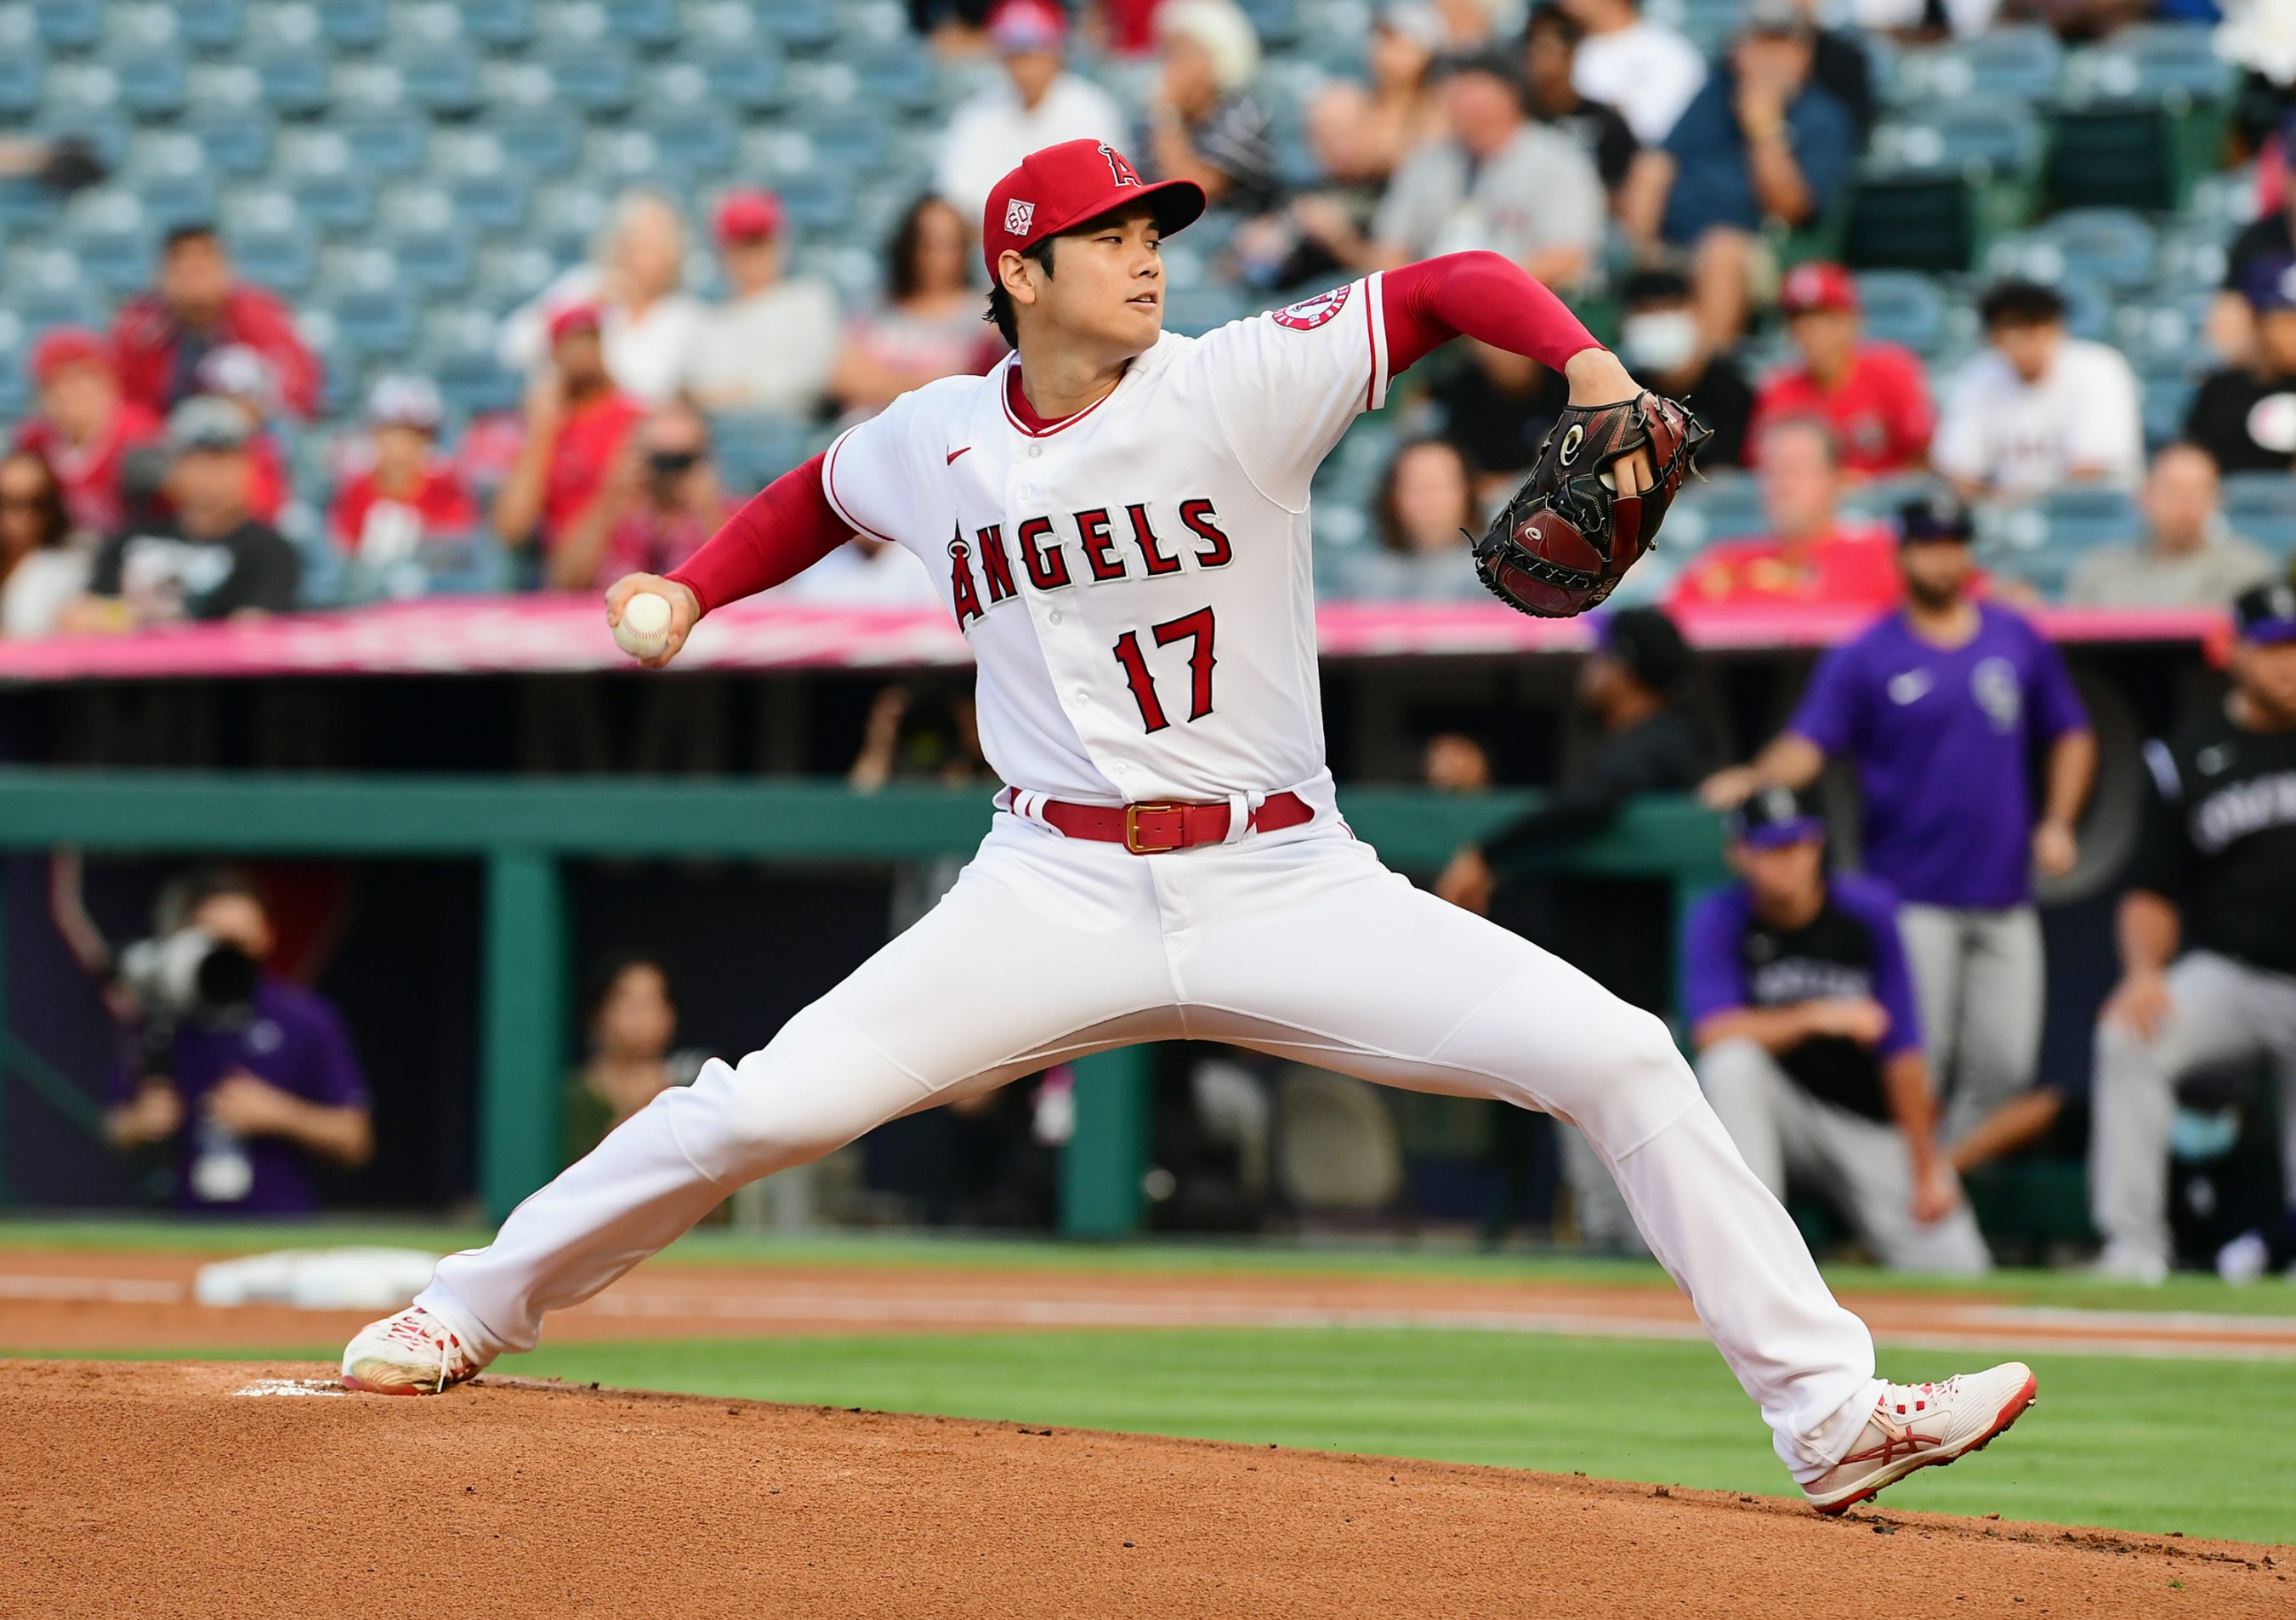 Baseball: Ohtani's pitching status this season in doubt with arm strain